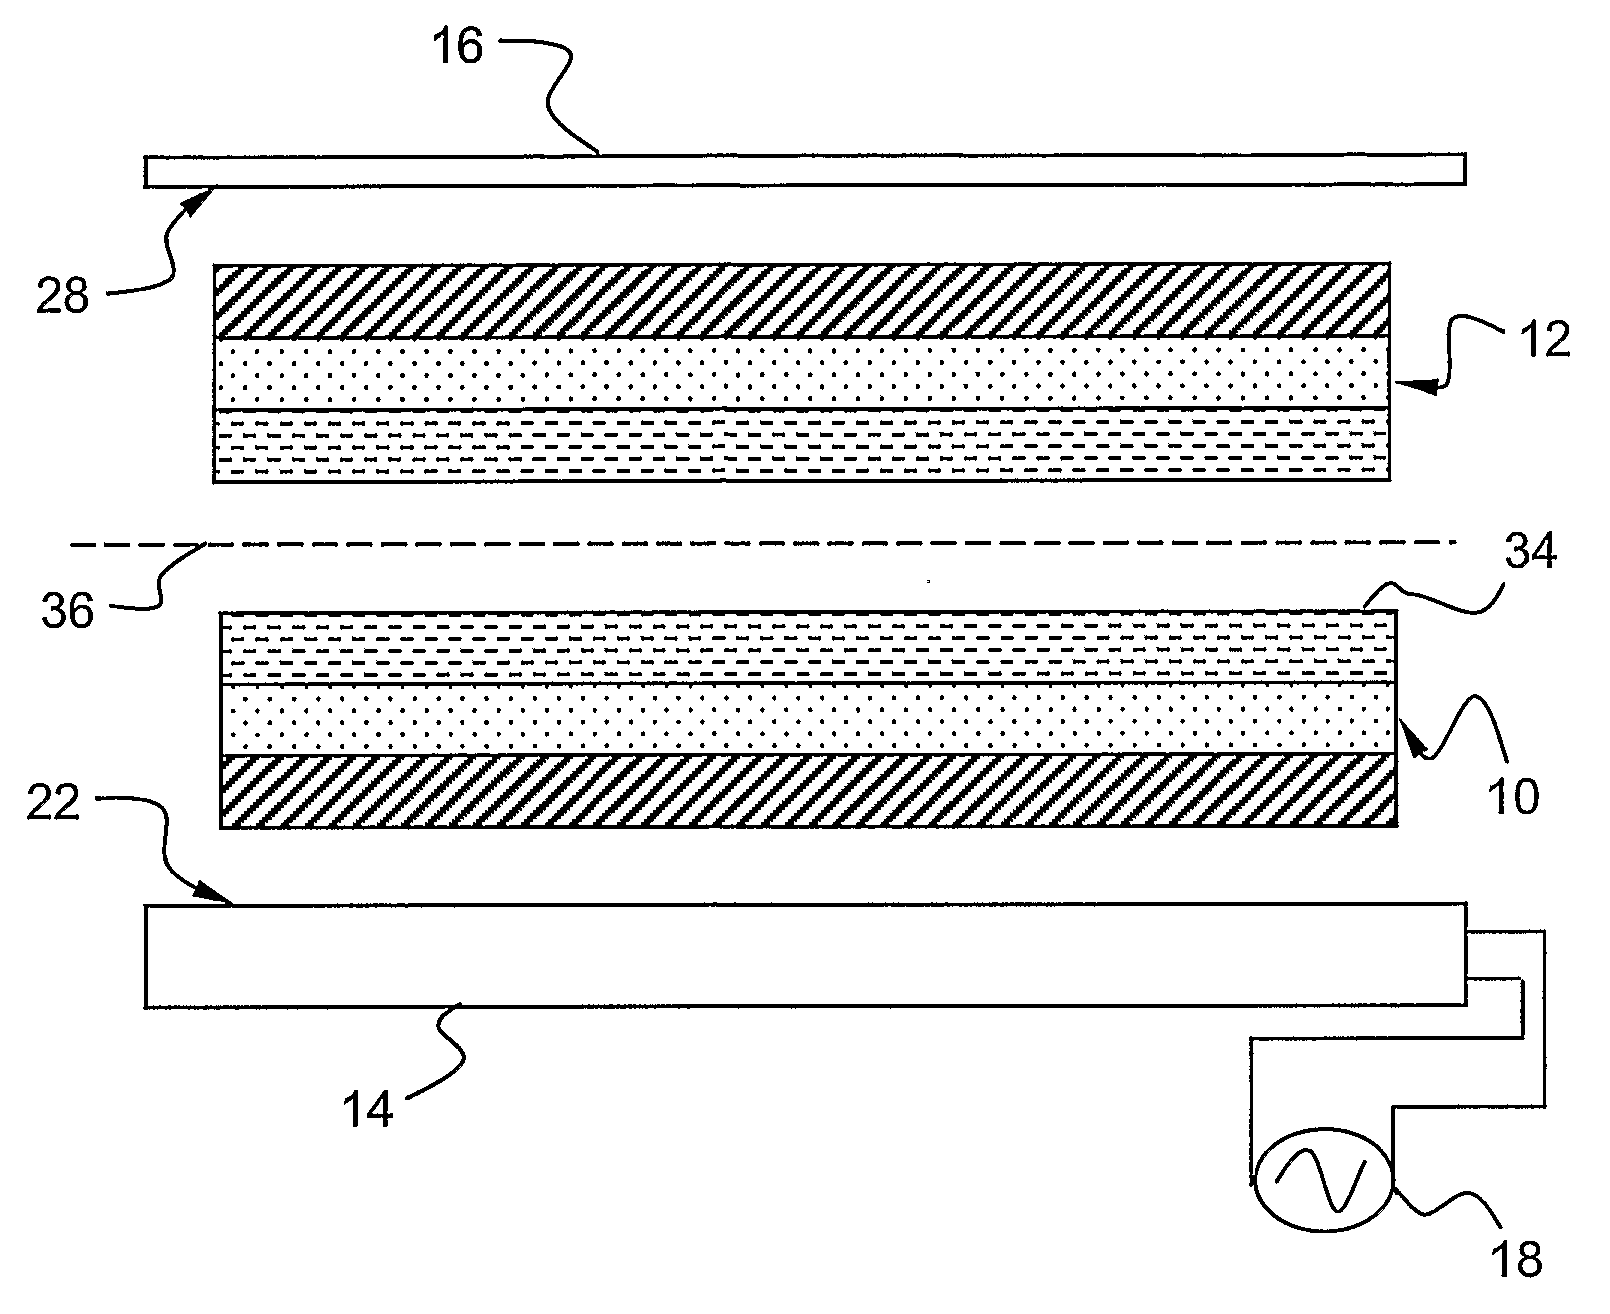 Method and Device for Sealing